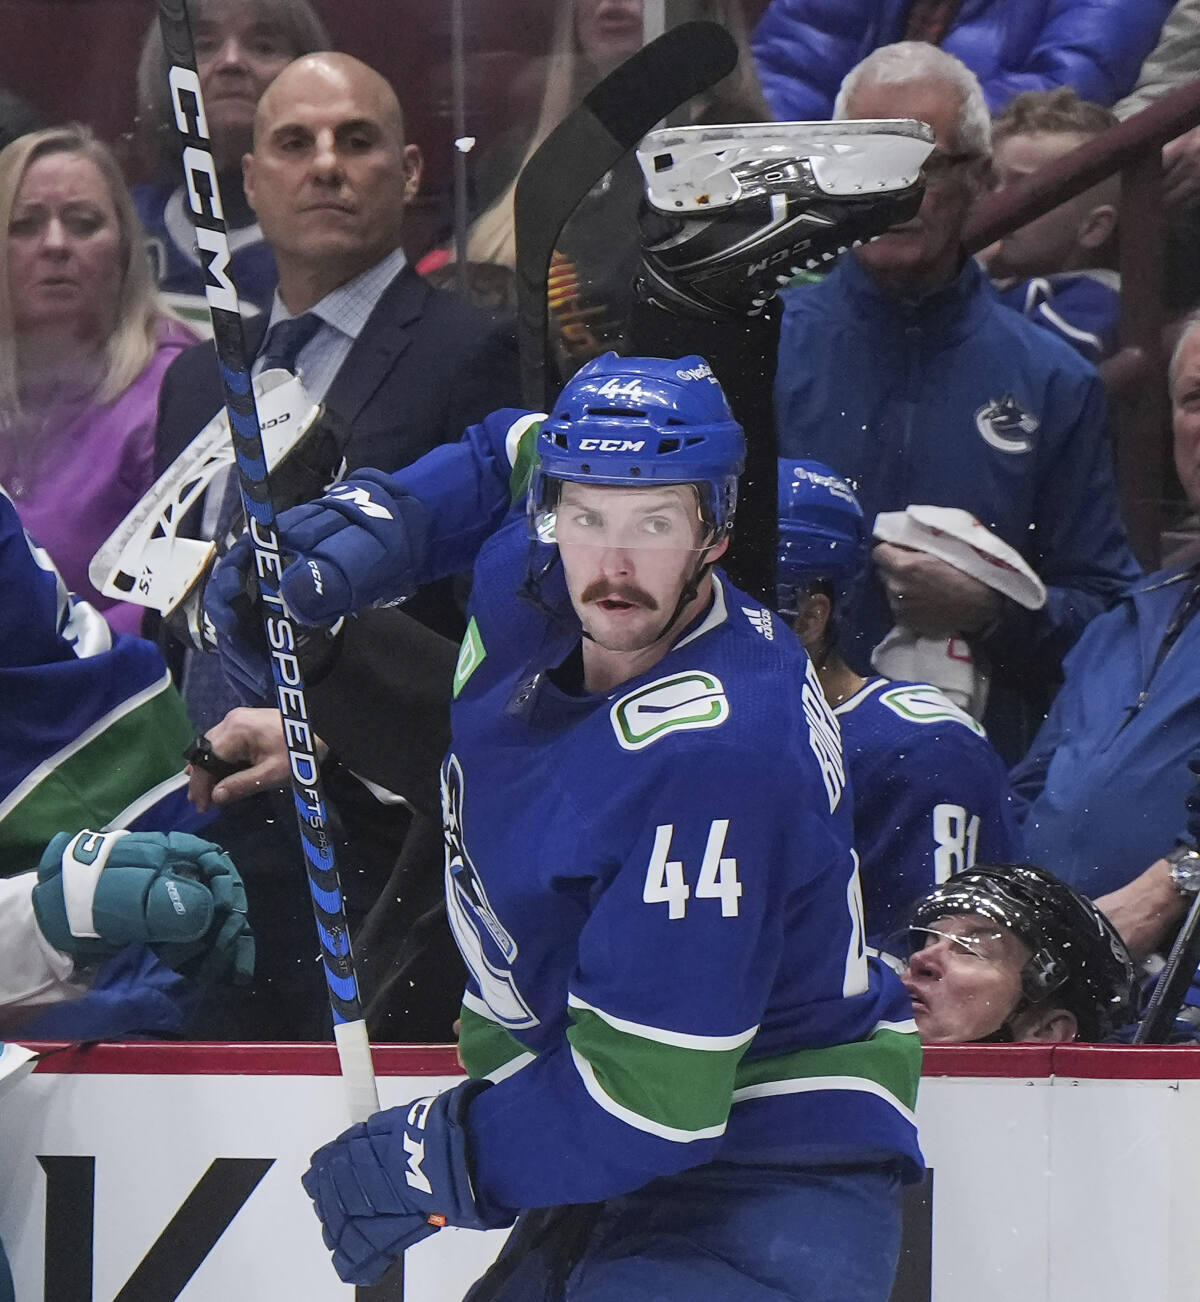 Canucks can't win in alternate jerseys (except the skate